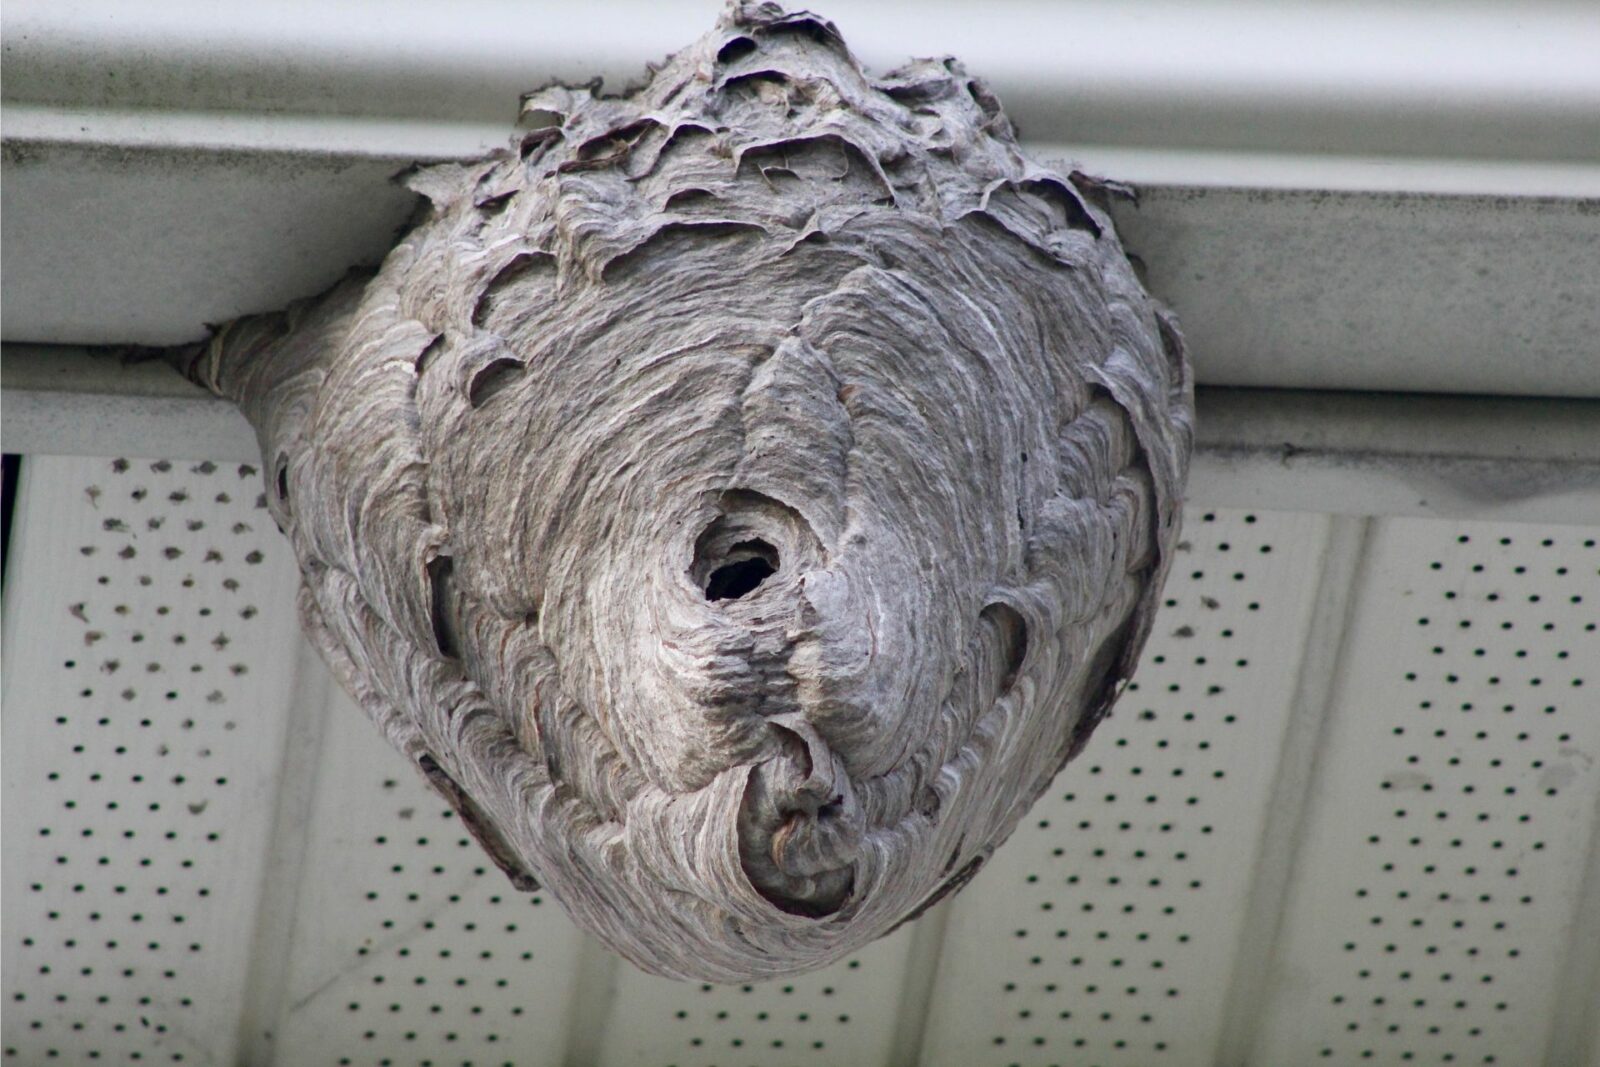 How to Get Rid of a Wasp Nest